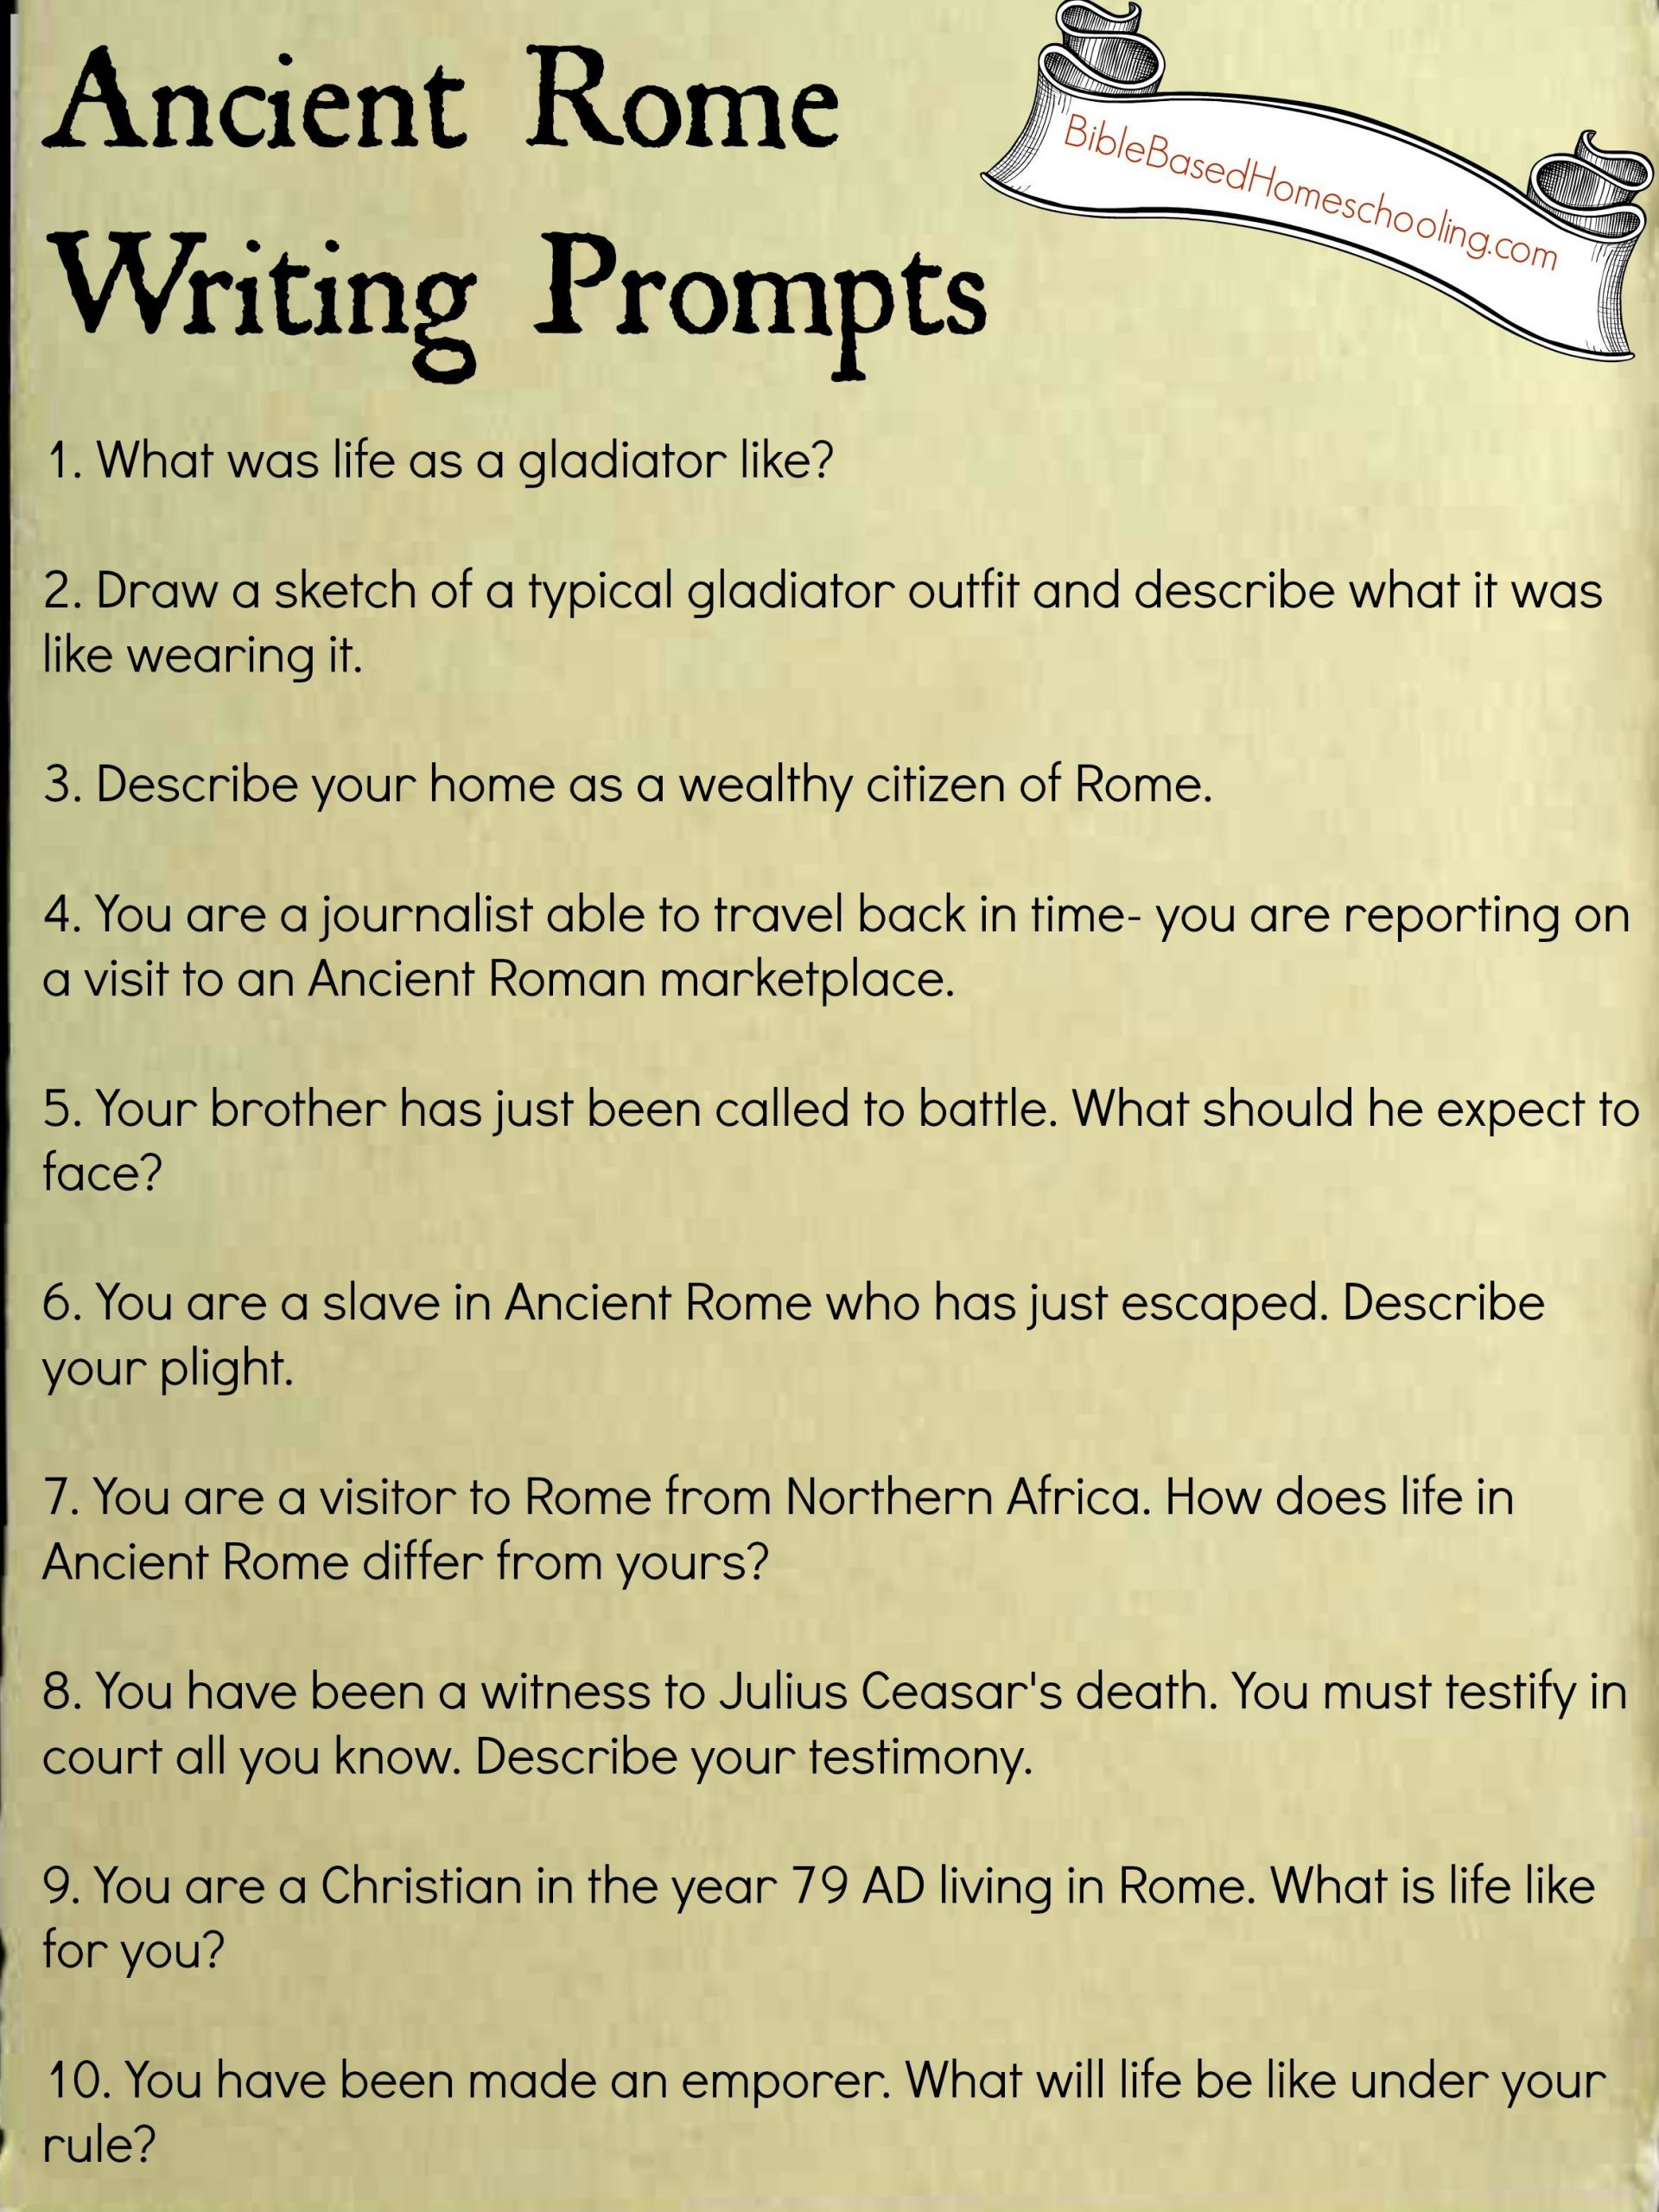 Free Ancient Rome Writing Prompts Printable | Ancient Rome